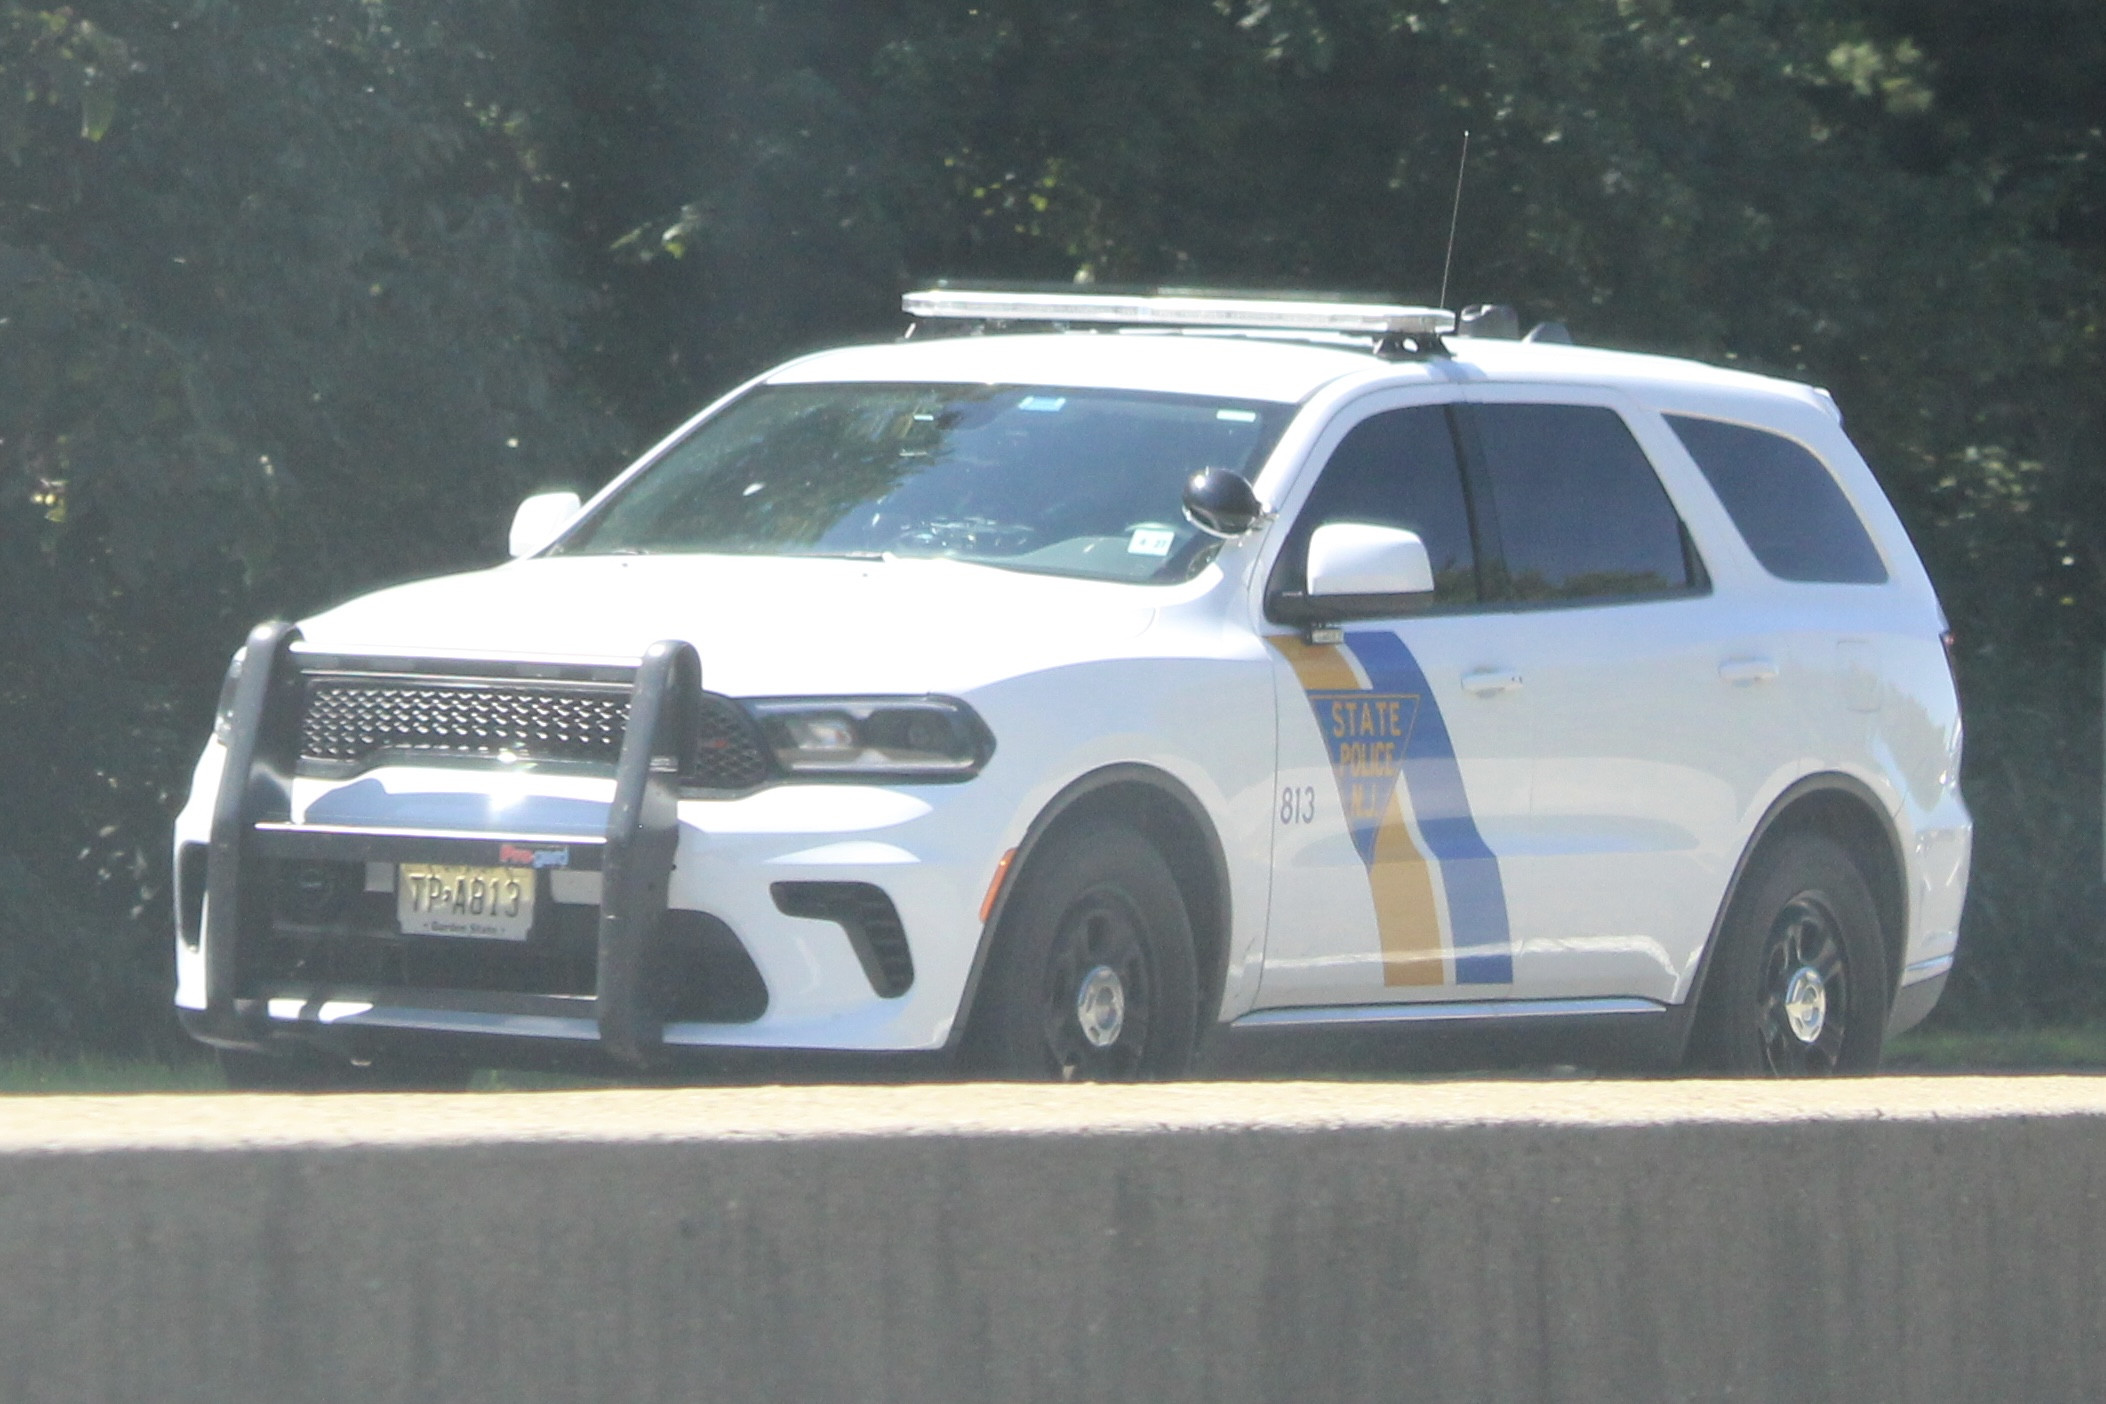 A photo  of New Jersey State Police
            Cruiser 813, a 2021 Dodge Durango             taken by @riemergencyvehicles